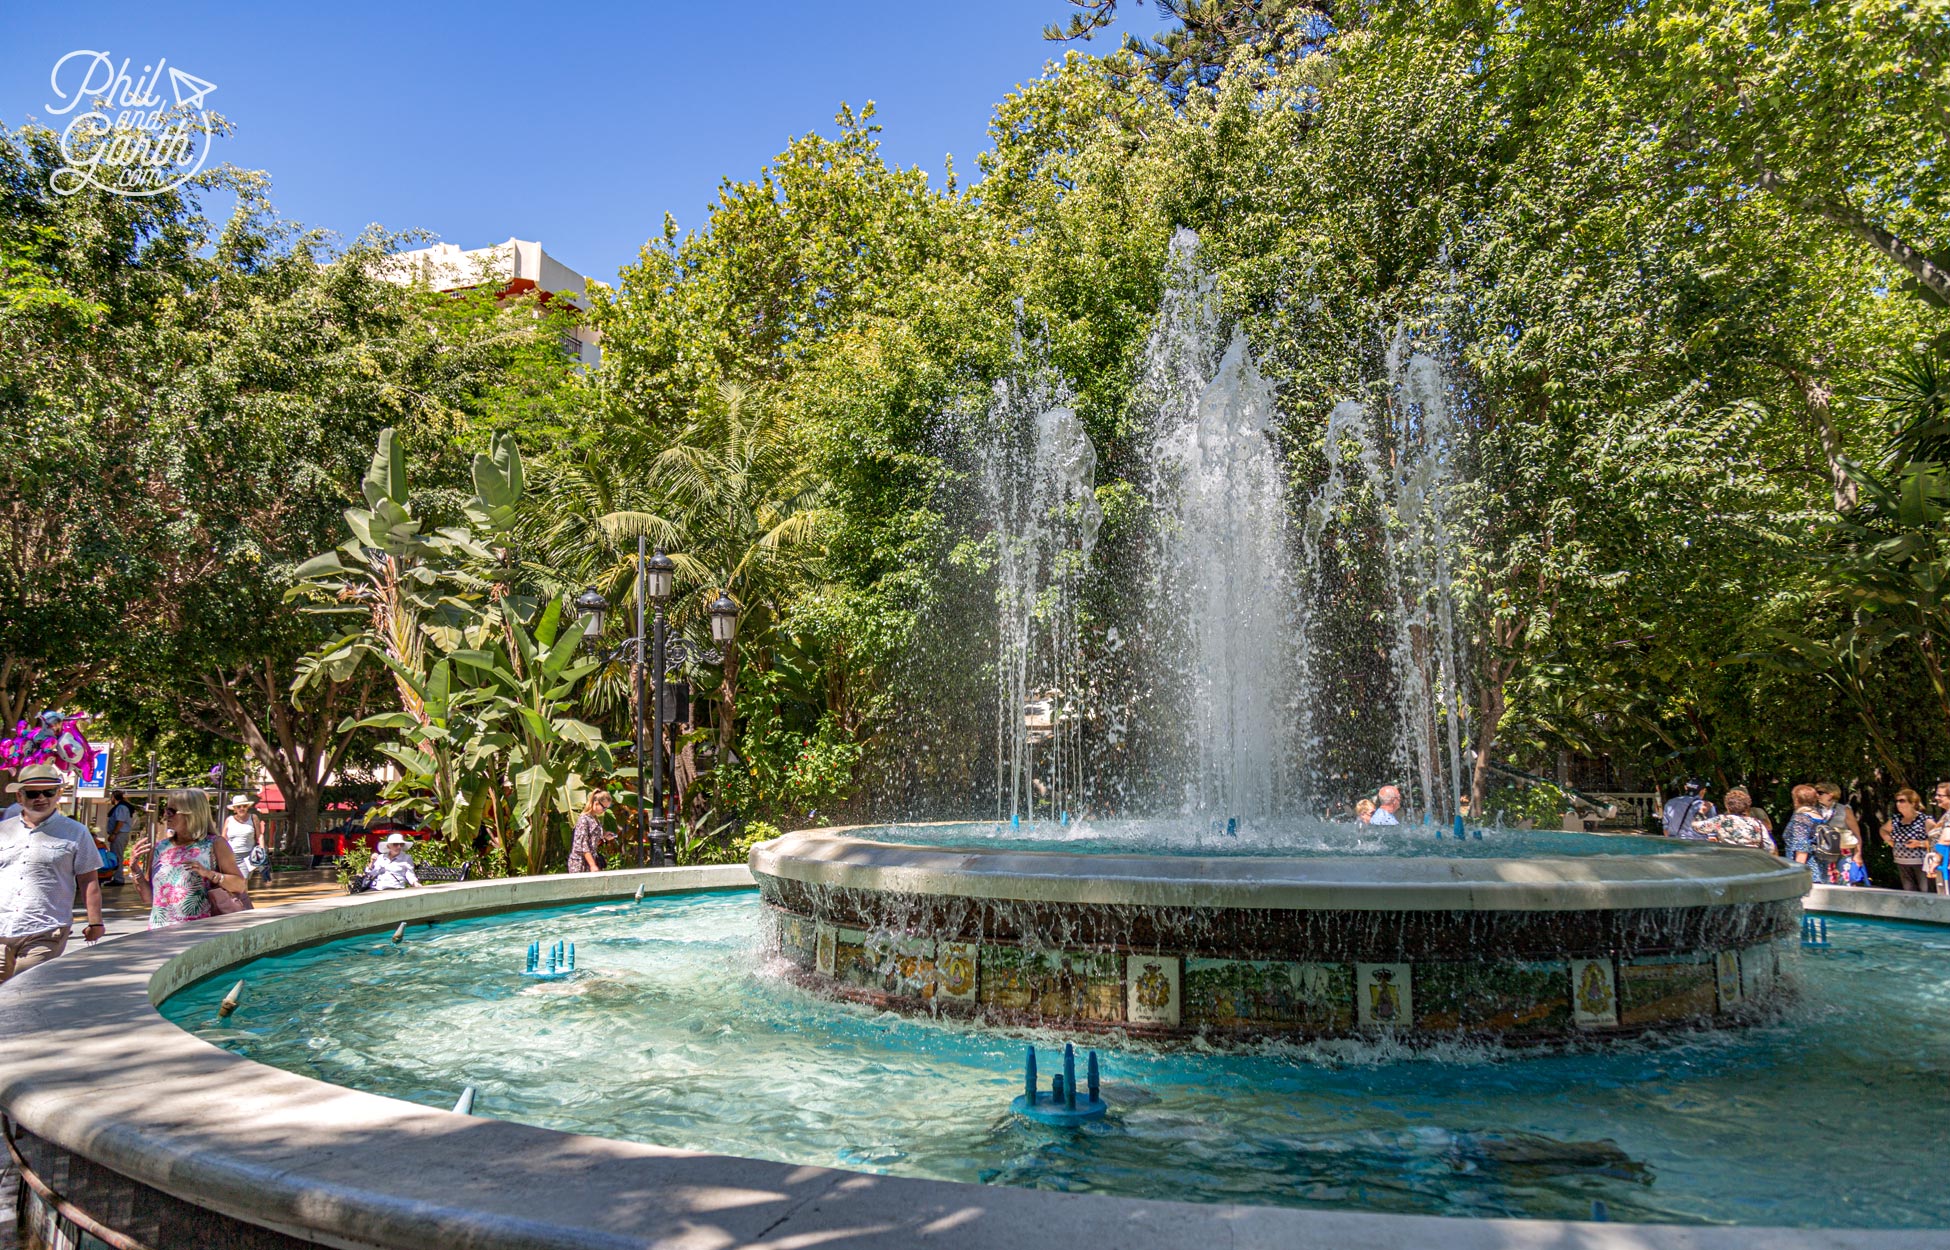 The Fuente Virgen del Rocío fountain dates from 1792 and the tiles tell the history of Marbella